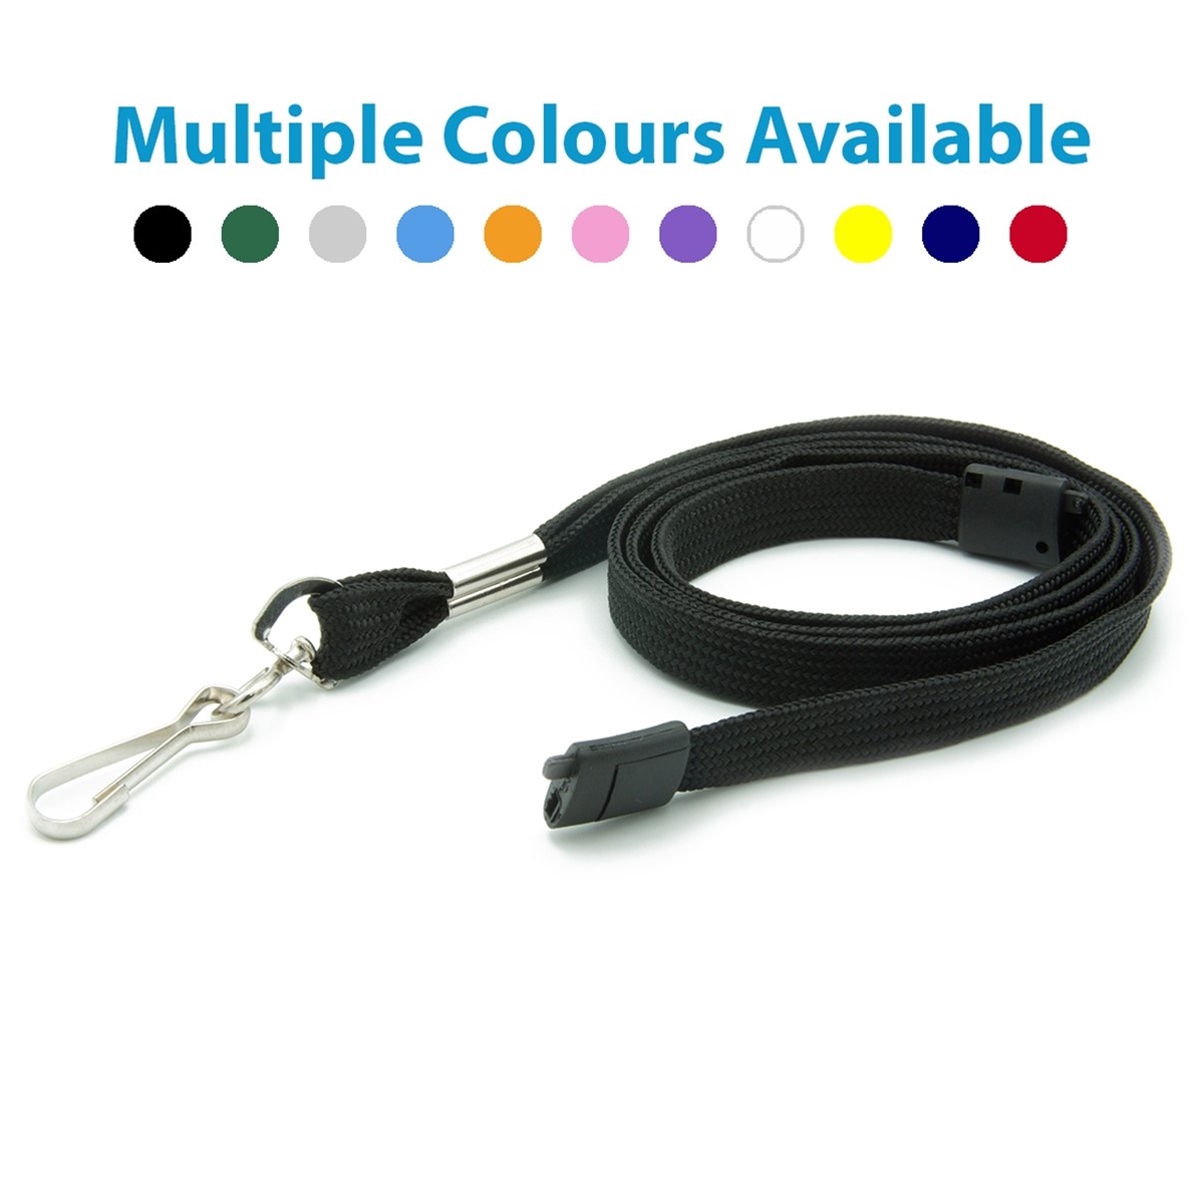 black plain 10mm premium lanyard with a metal hook and plastic breakaway showing multiple colours available